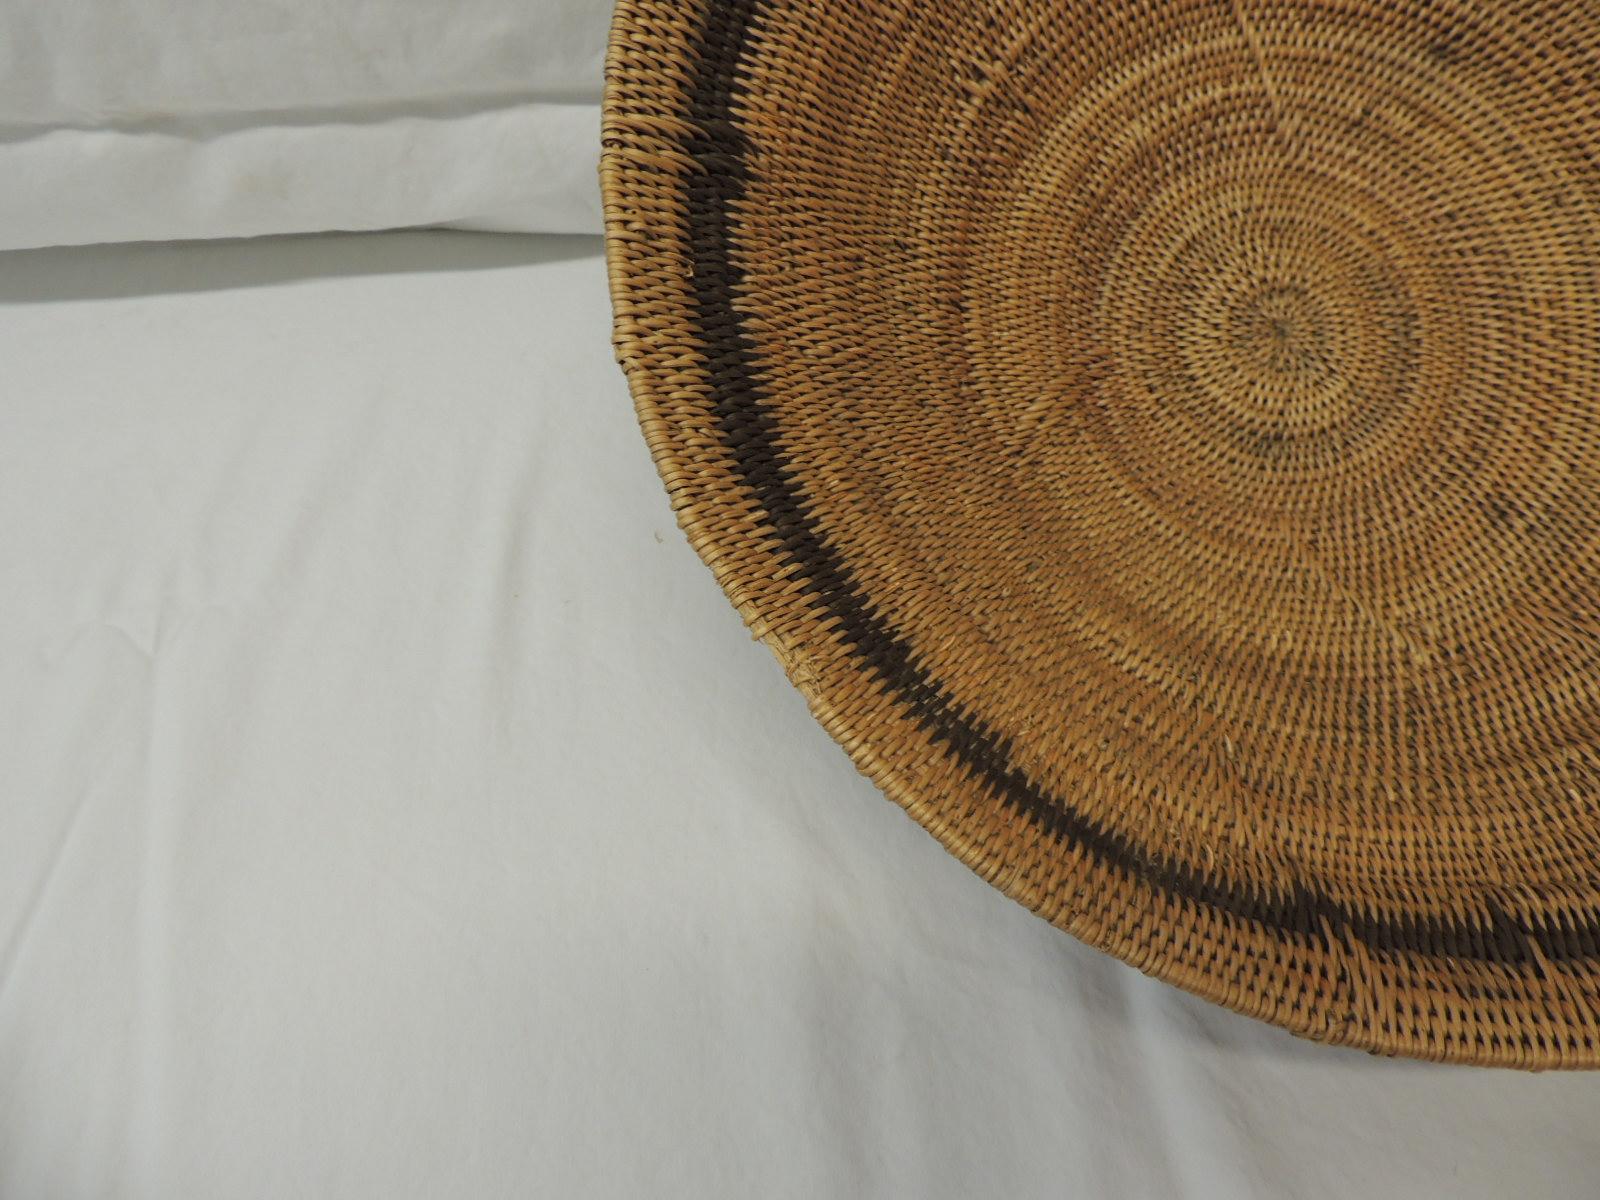 Large vintage woven seagrass ethnic round African deep basket.
Artisanal handwoven basket with tribal designs and patterns all around.
(Is not flat is more like a deep bowl shape, double woven technique.)
Size: 17